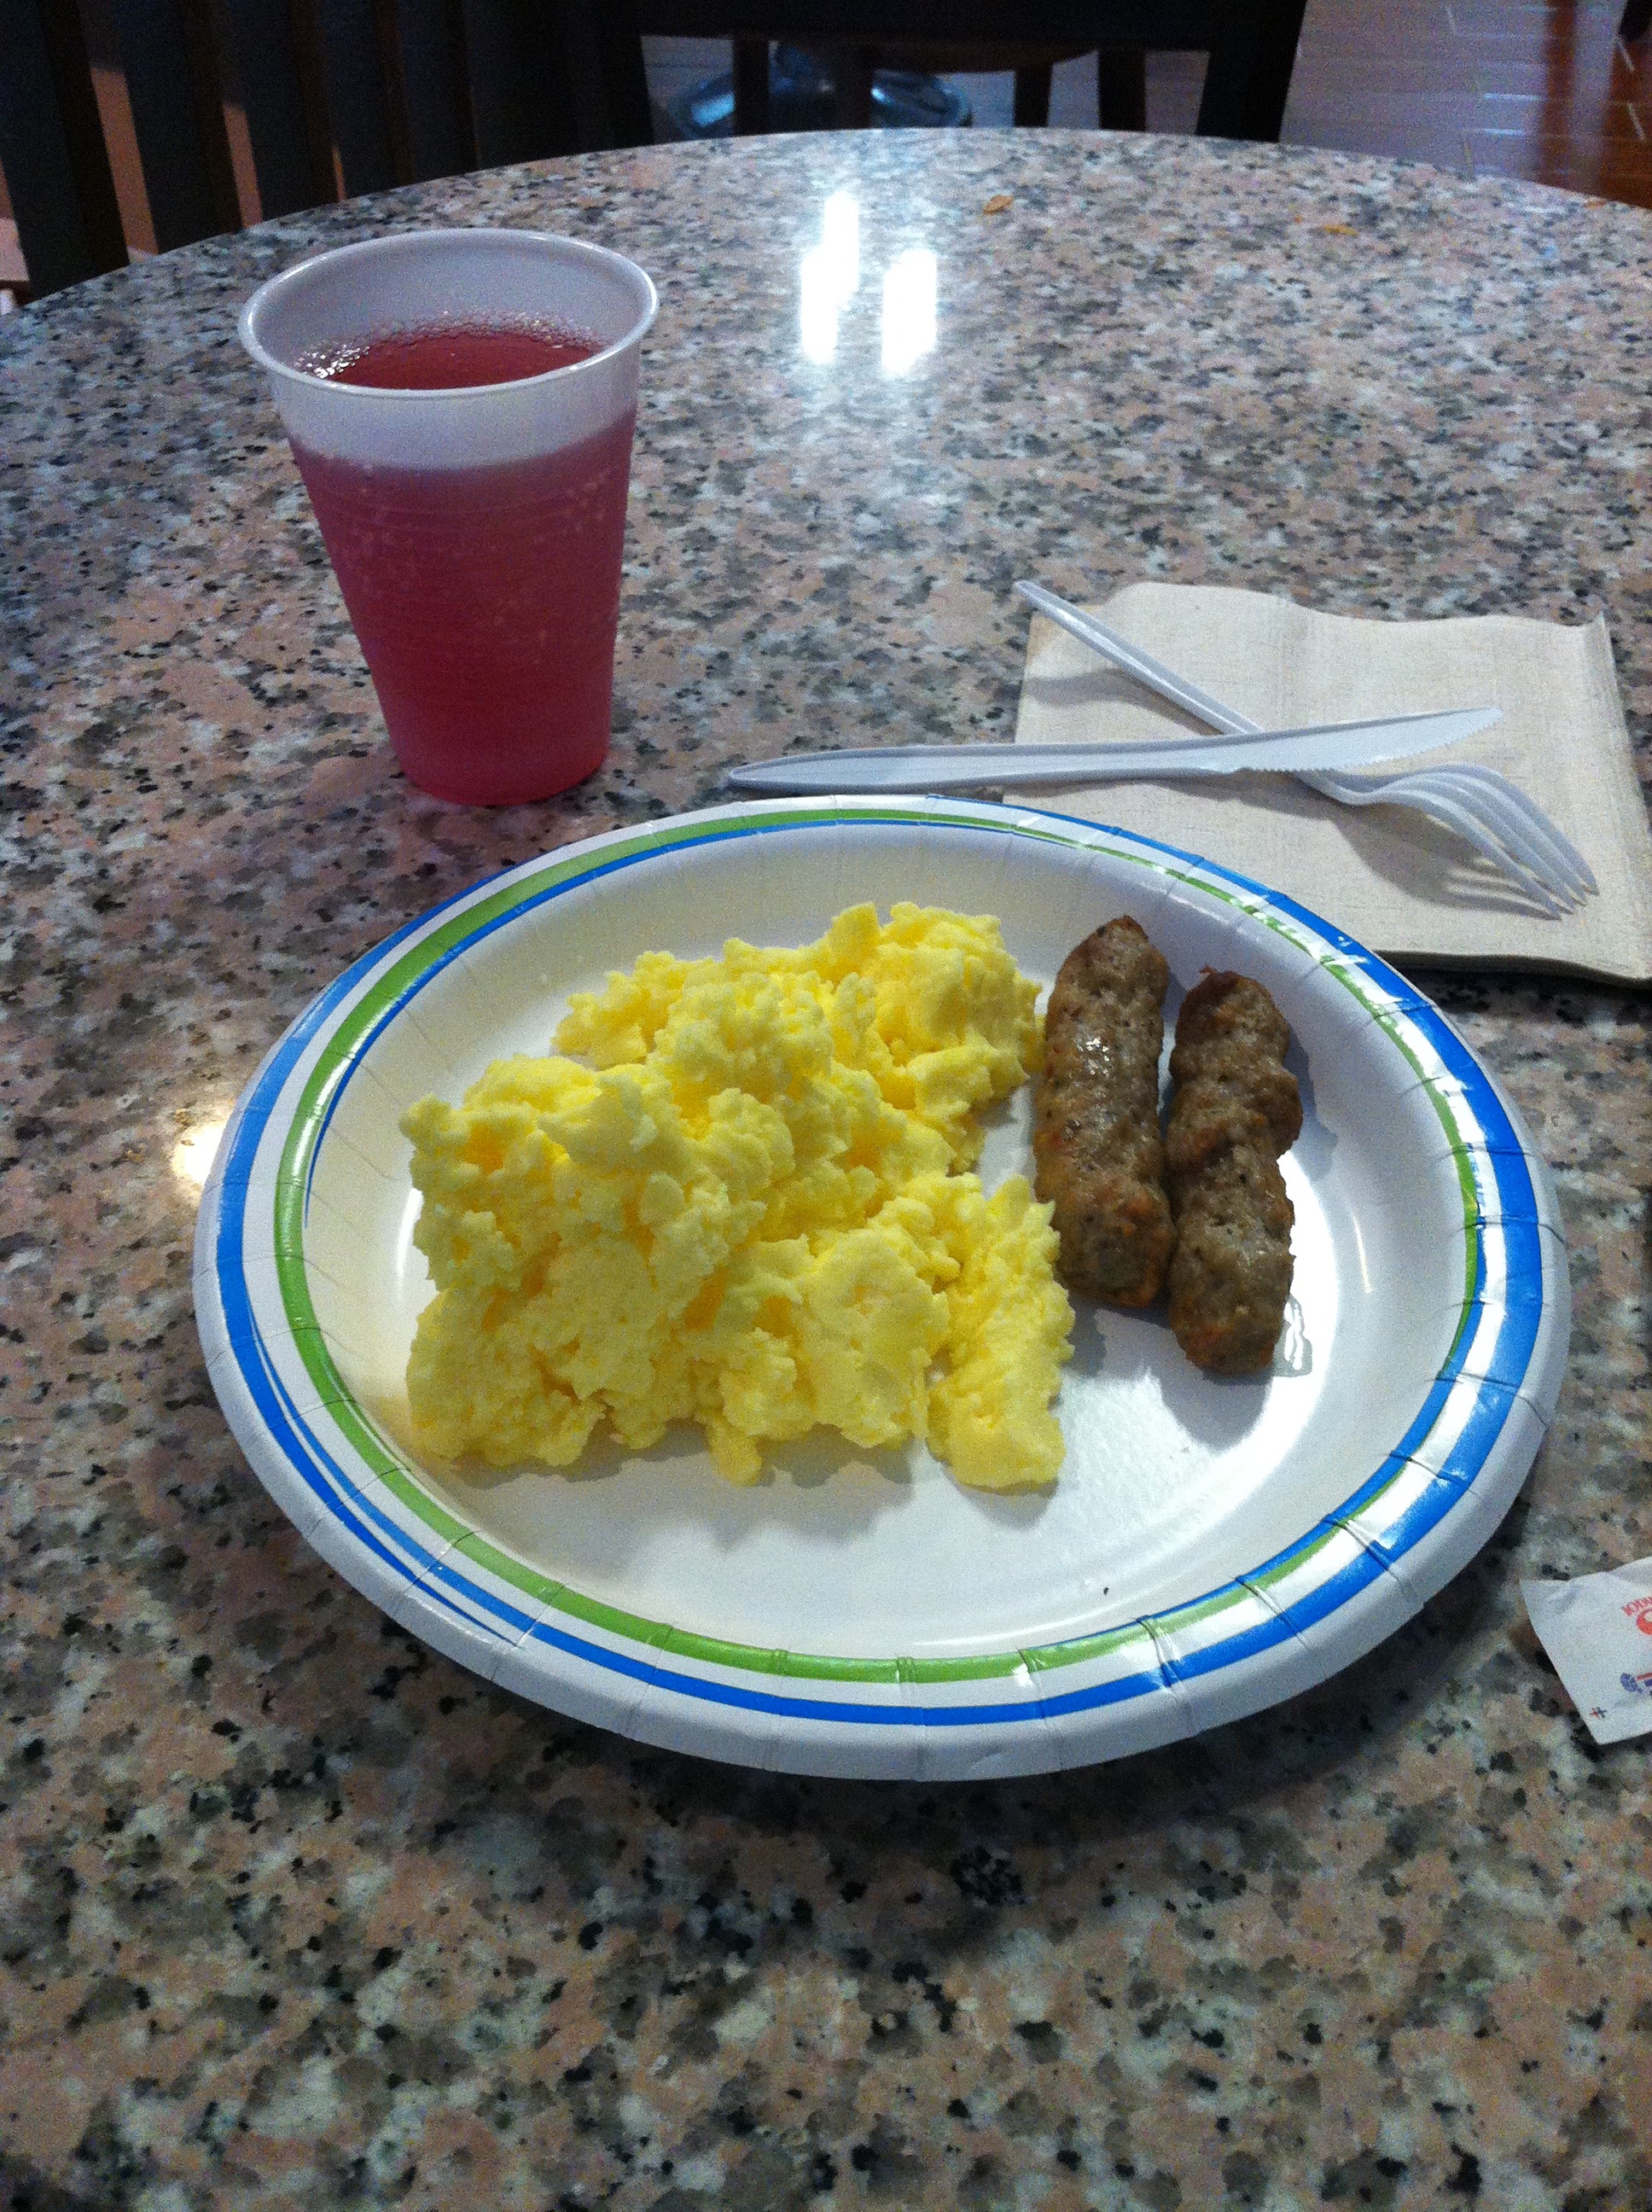 The C Rations breakfast at the Best Western.